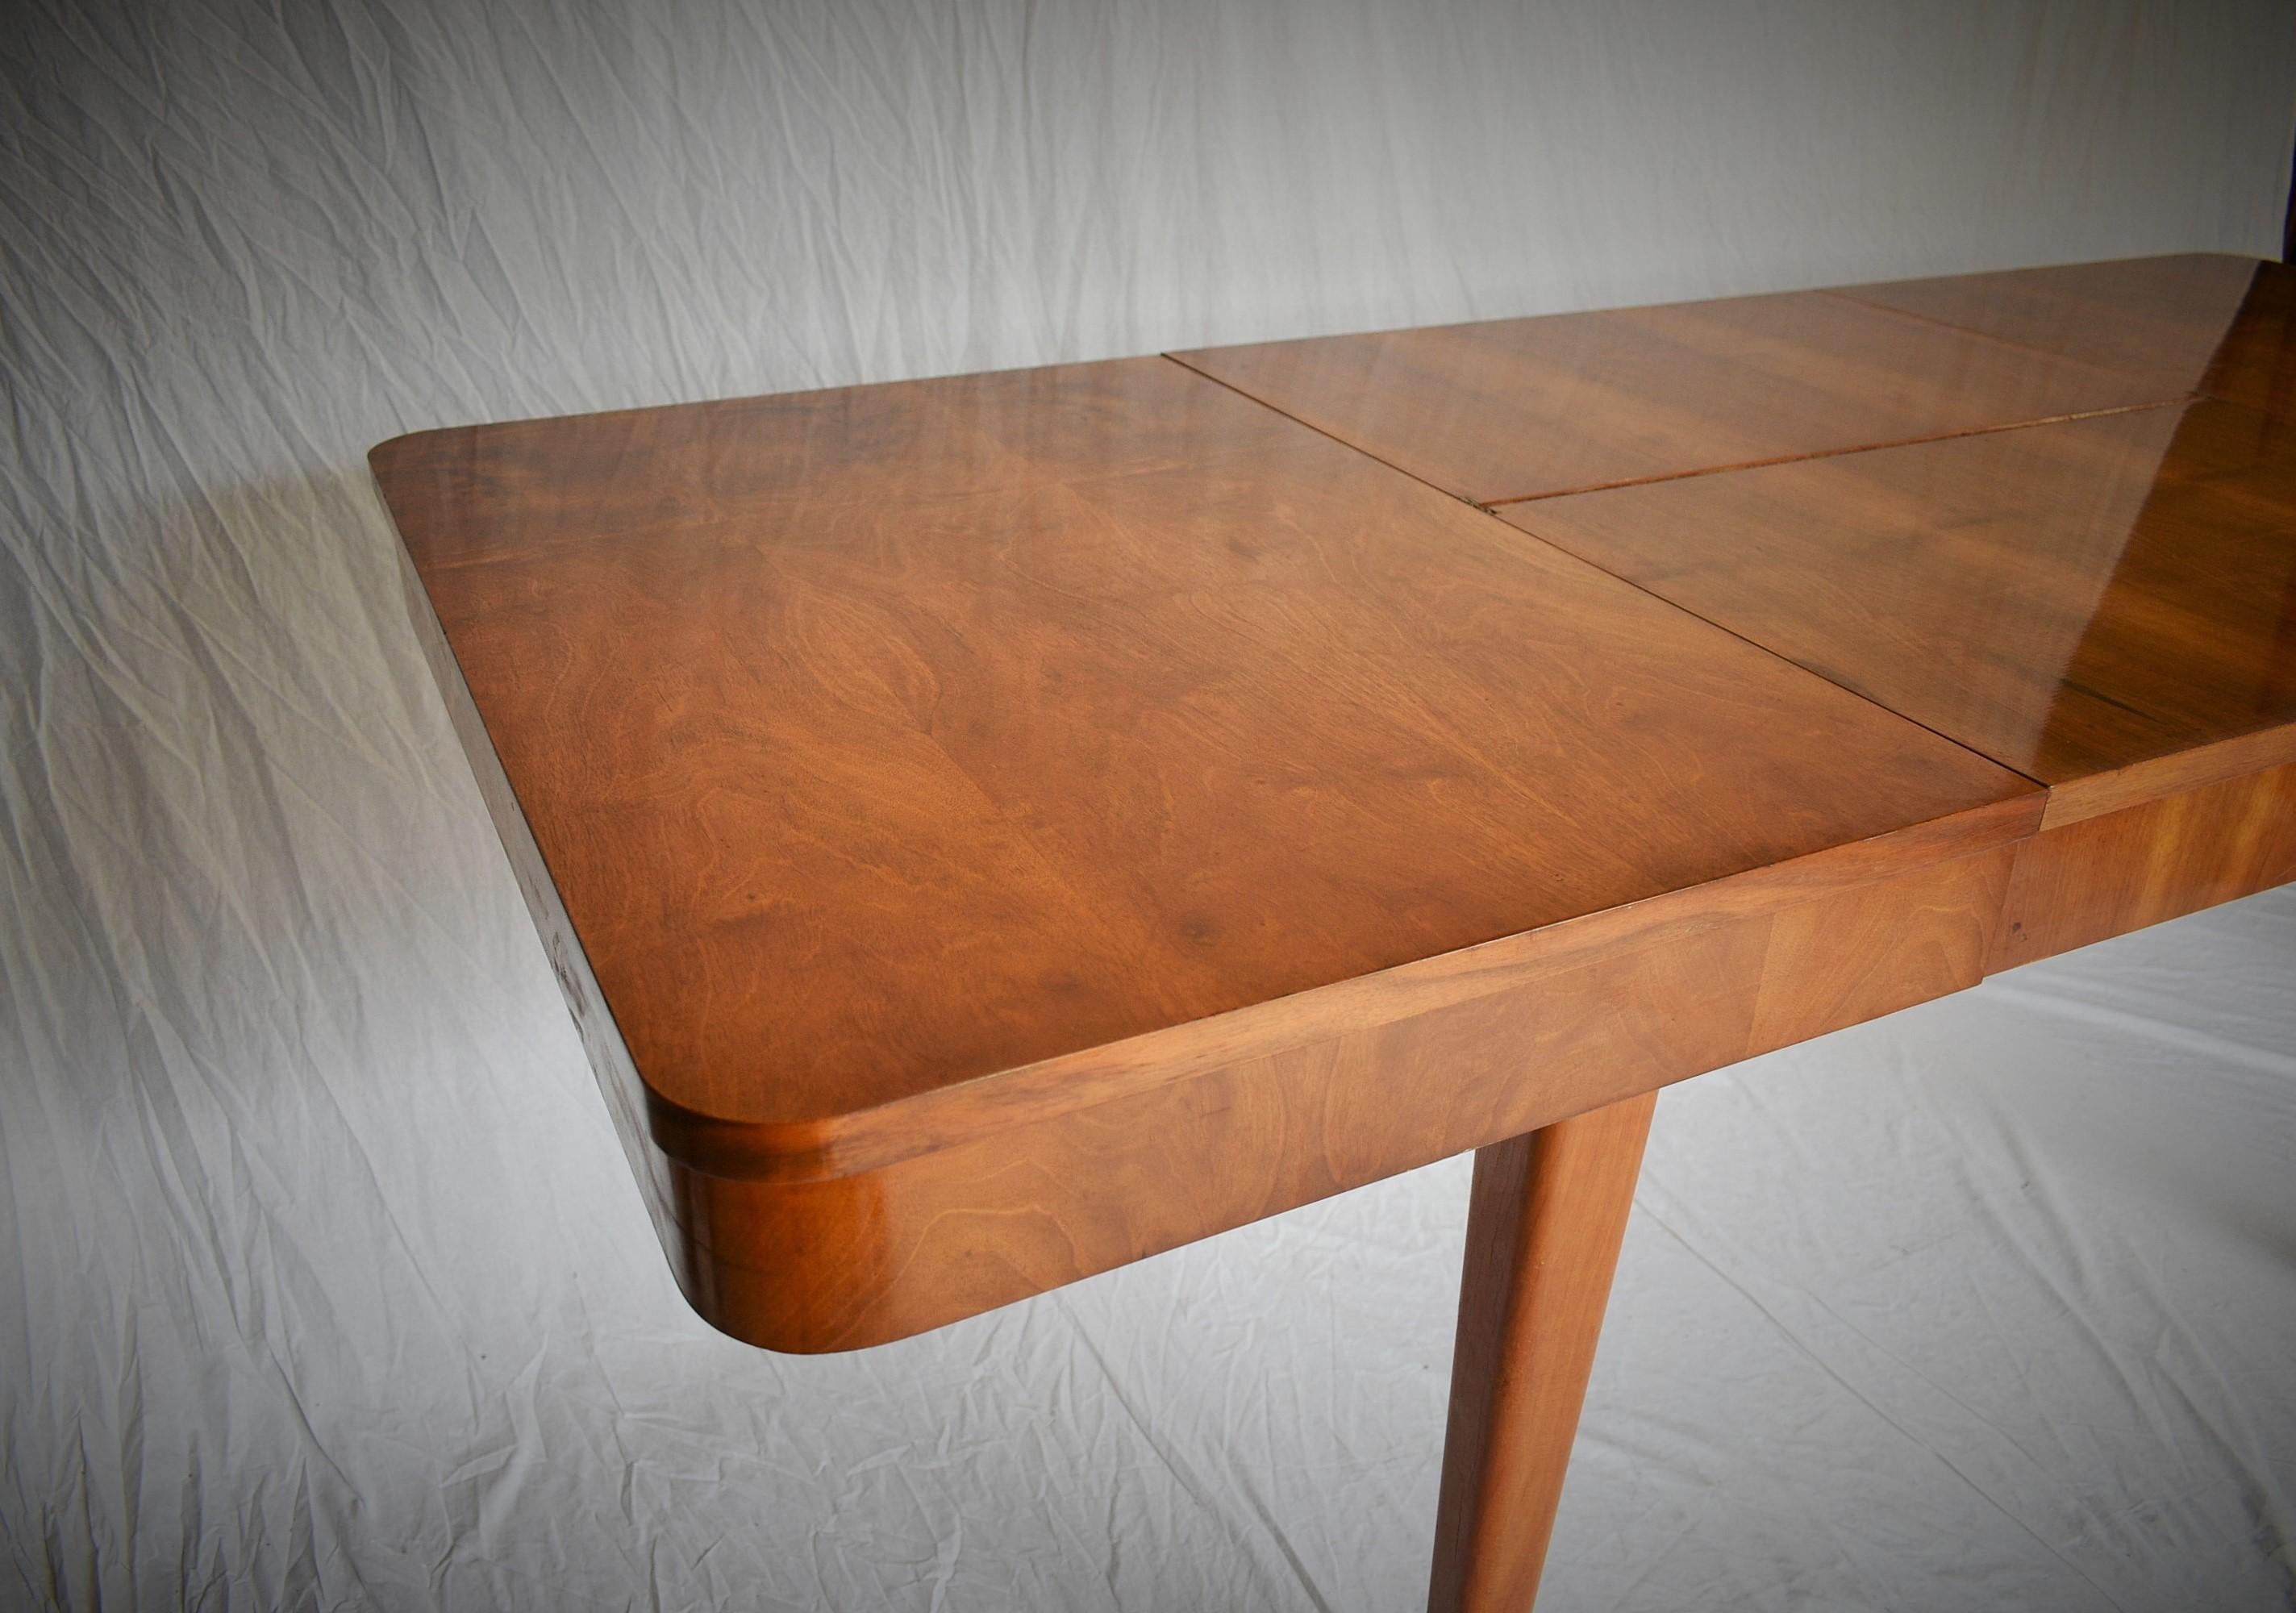 - Made in Czechoslovakia
- Made of wood
- Dimension of extending width 191 cm
- Good condition.
- The table is stabil
- Cleaned.